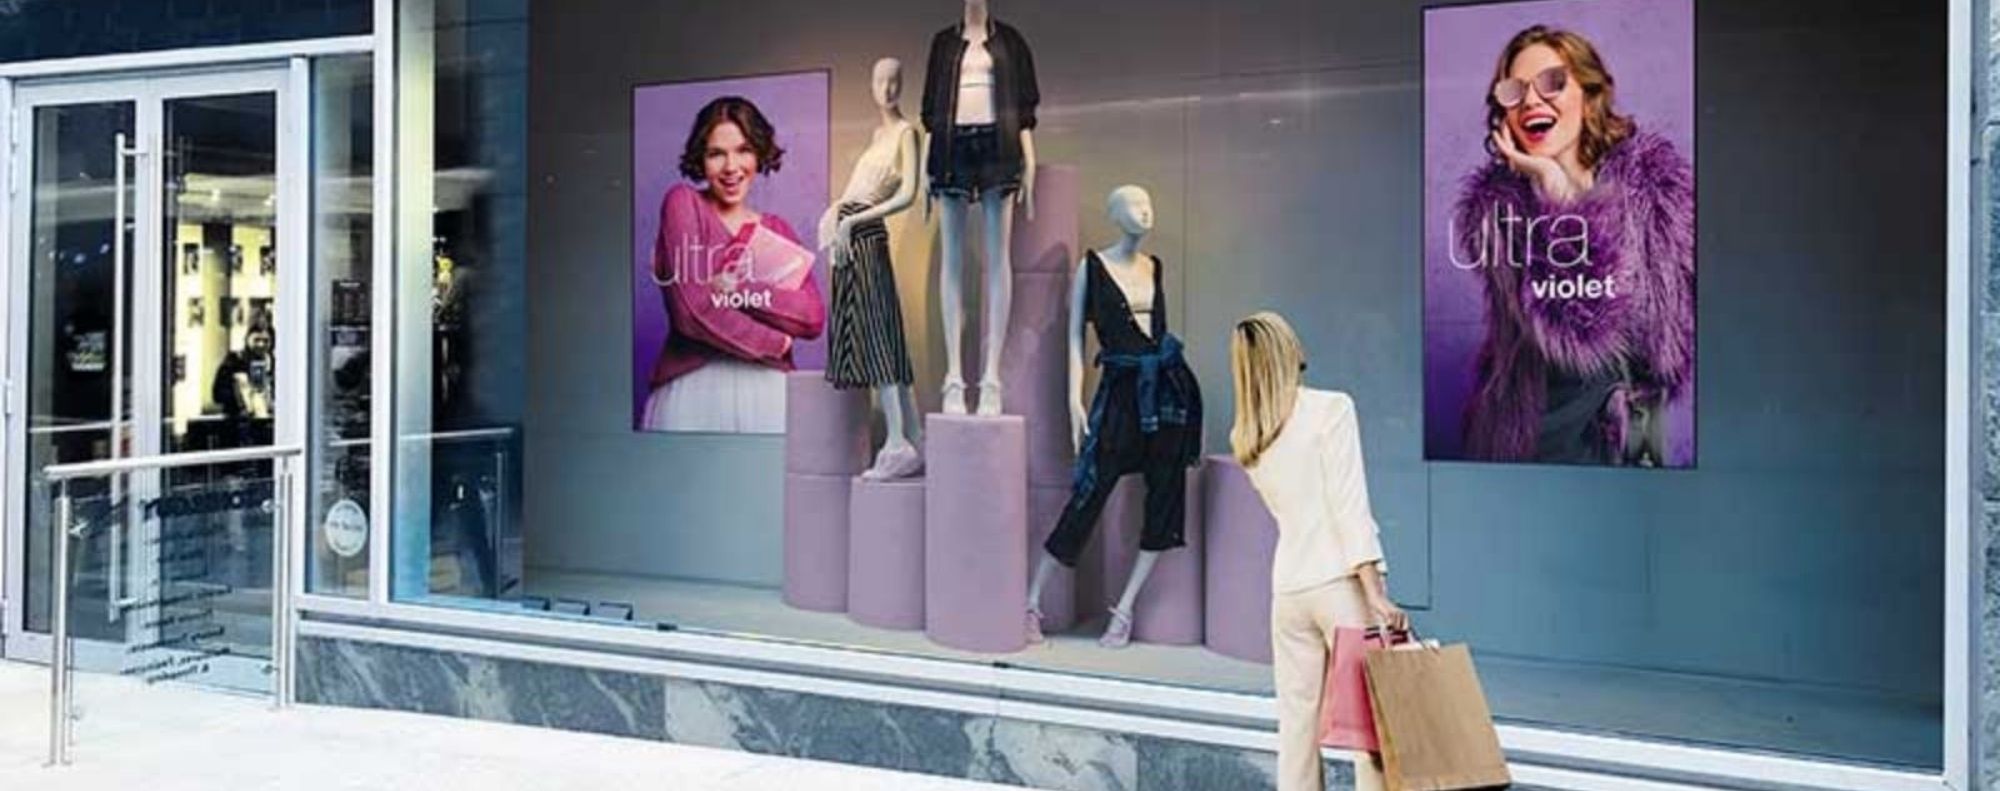 Retail Digital Signage in shopping mall